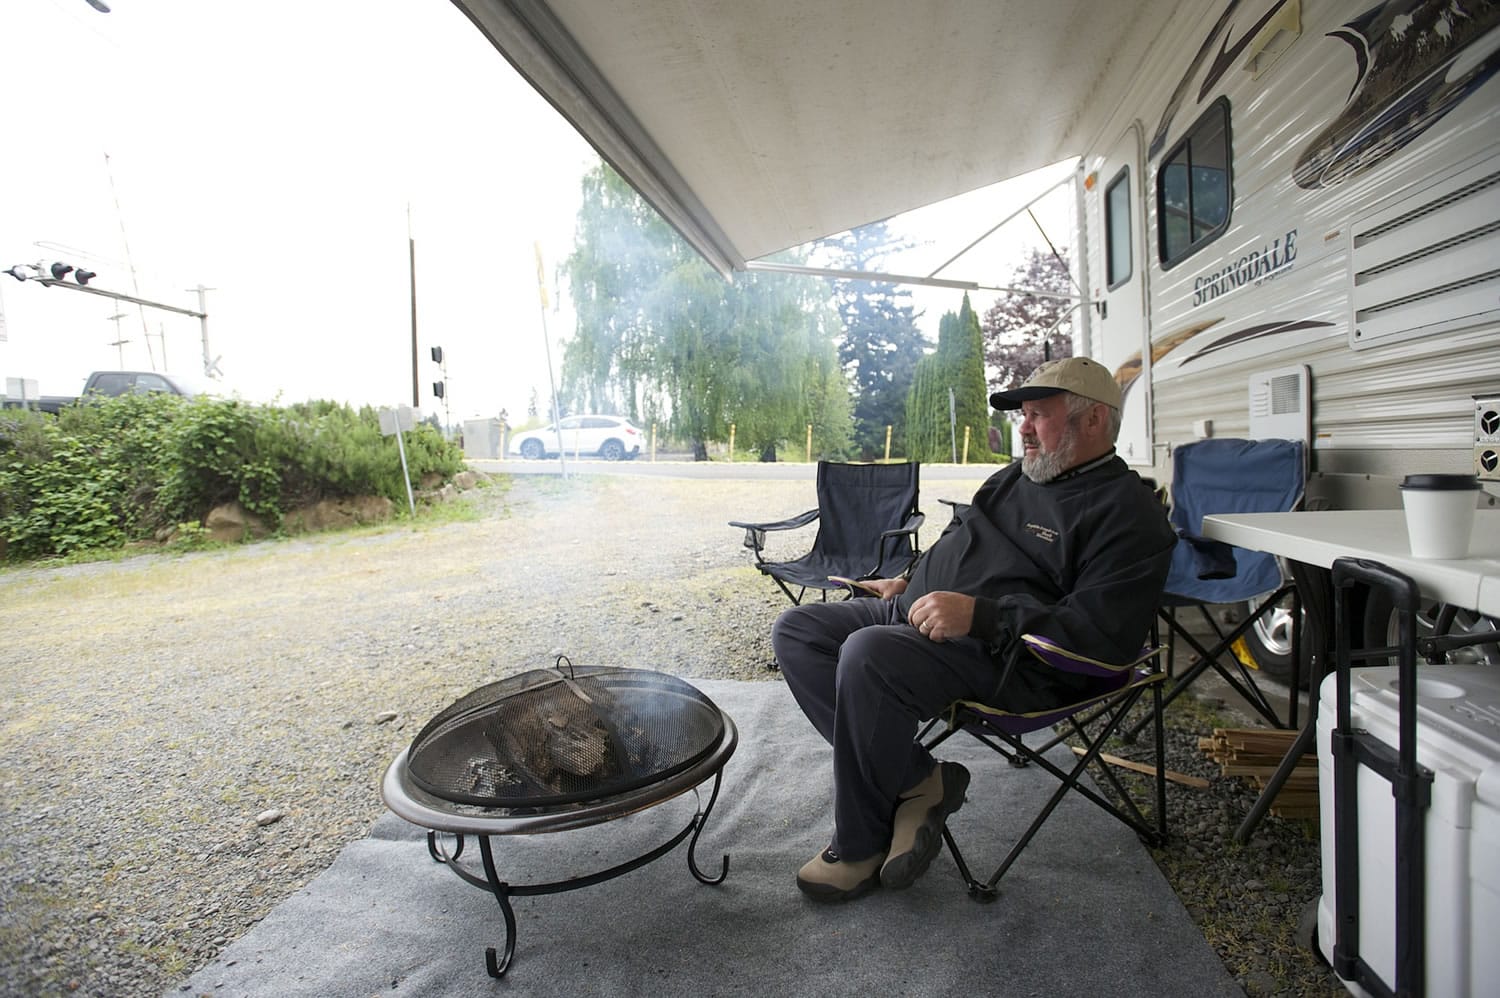 Washougal Mayor Sean Guard waits Thursday for the next train to pass during his weeklong vigil near the railroad crossing at 32nd Street in Washougal.